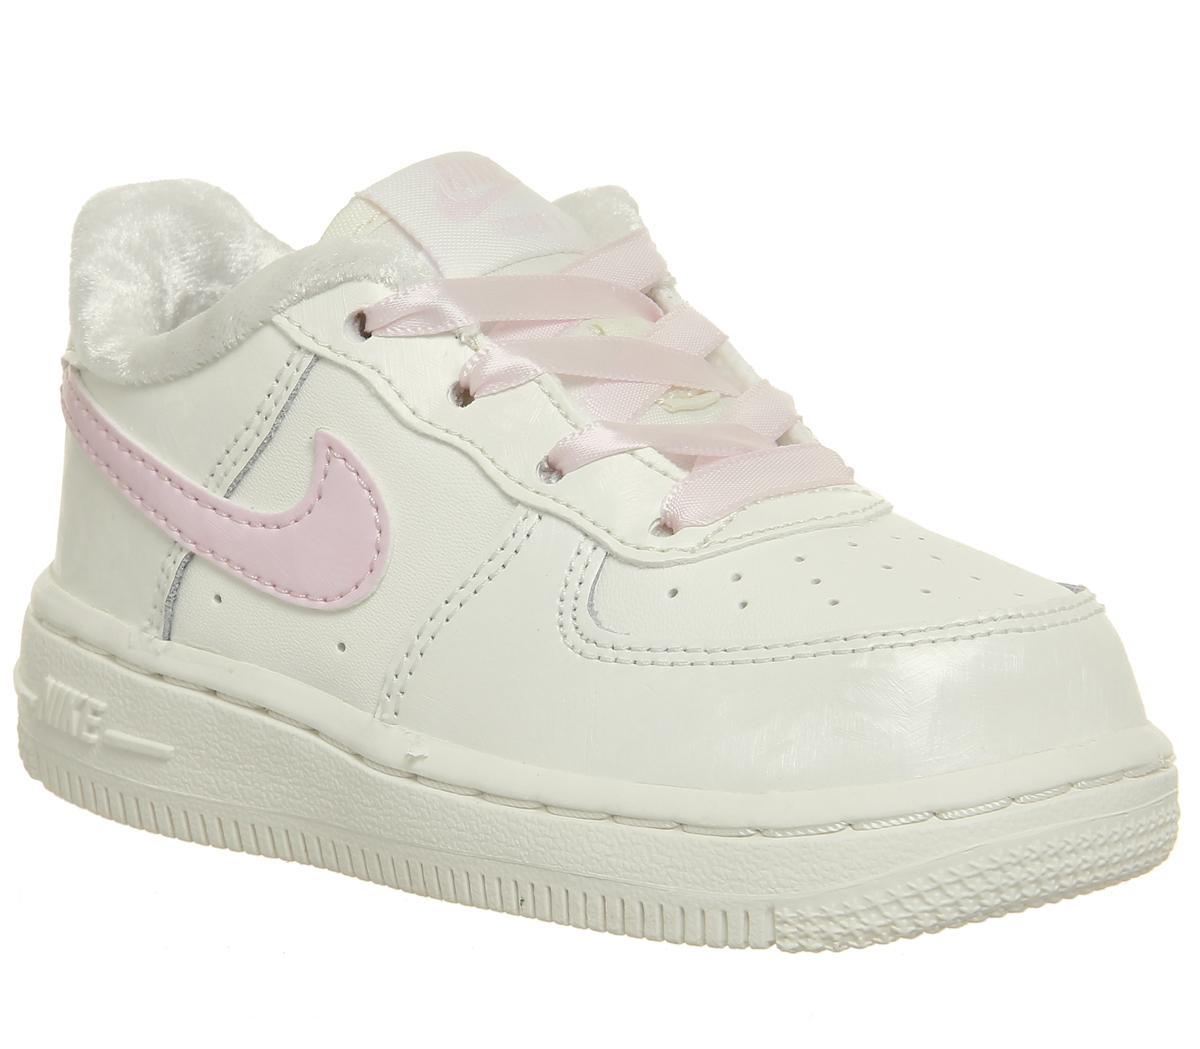 Nike Air Force 1 Infant White Artic 